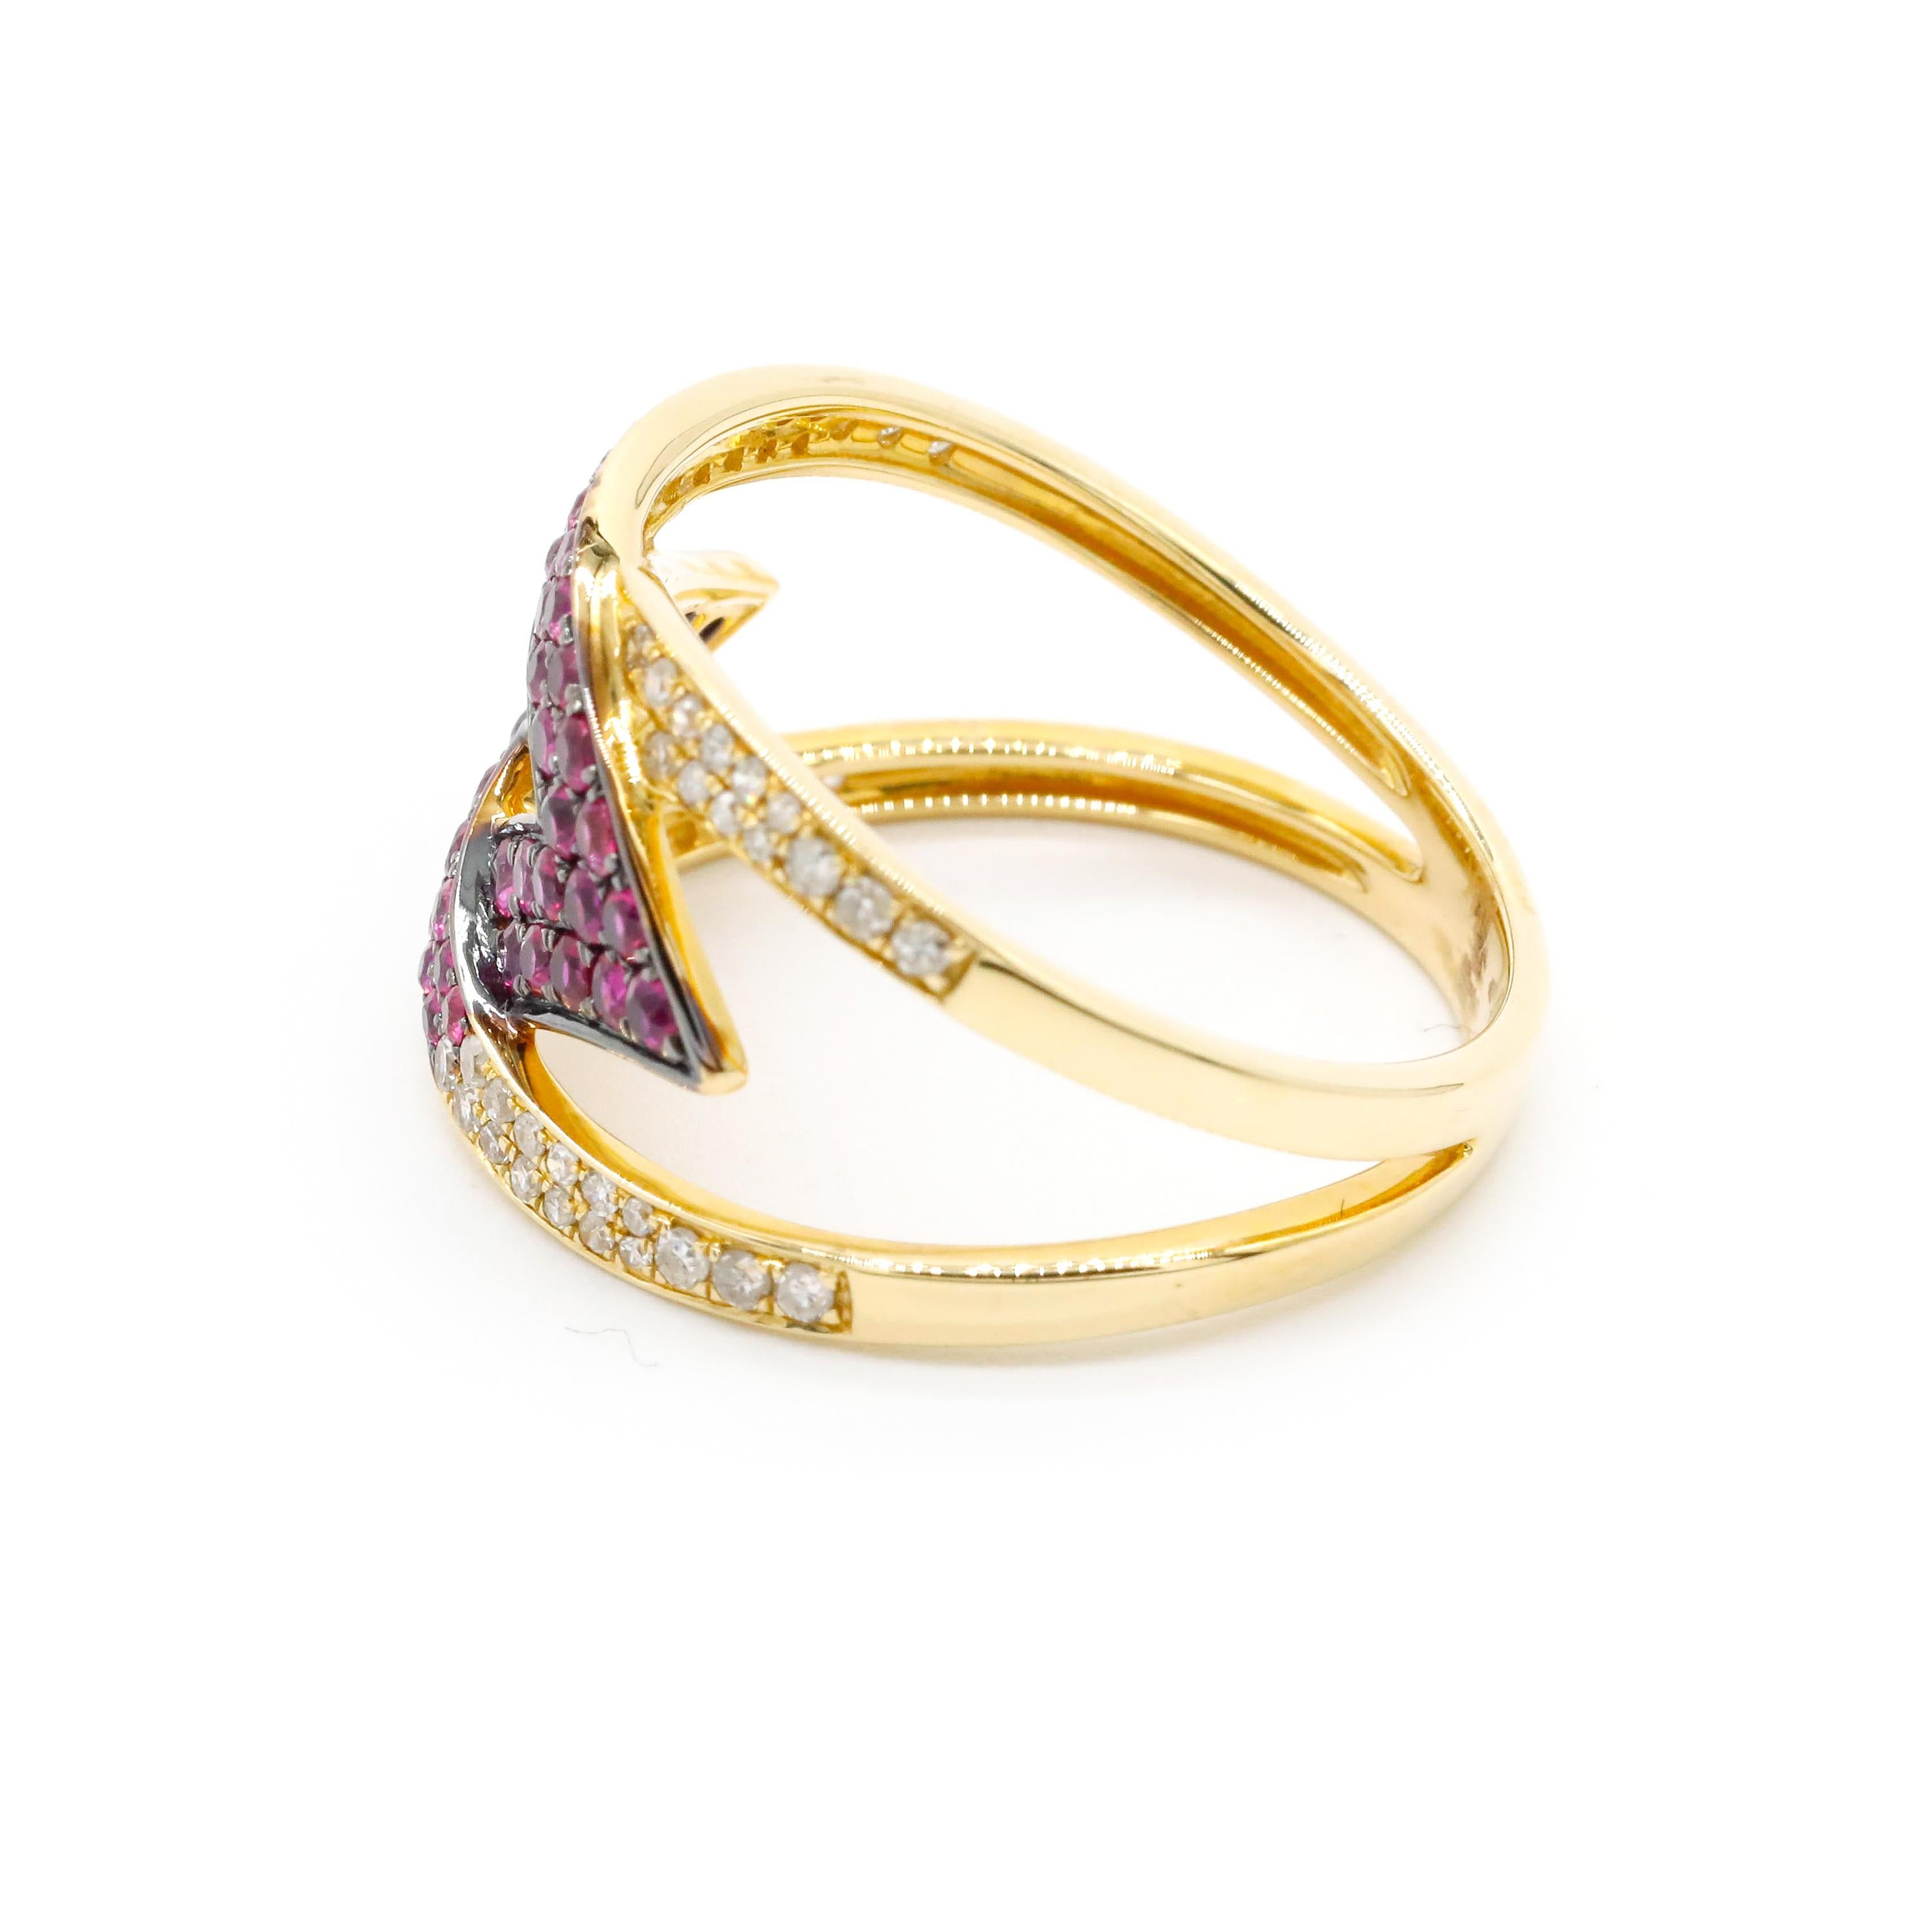 0.25 Carat Round Cut Diamond 0.62 Carat Ruby Pave 14k Yellow Gold Wrap Ring 

A wedding band or an Anniversary ring - this ring is just perfection. Featuring a single row of 0.62 Carat natural ruby stones , set in a Pave setting. Buffed to a